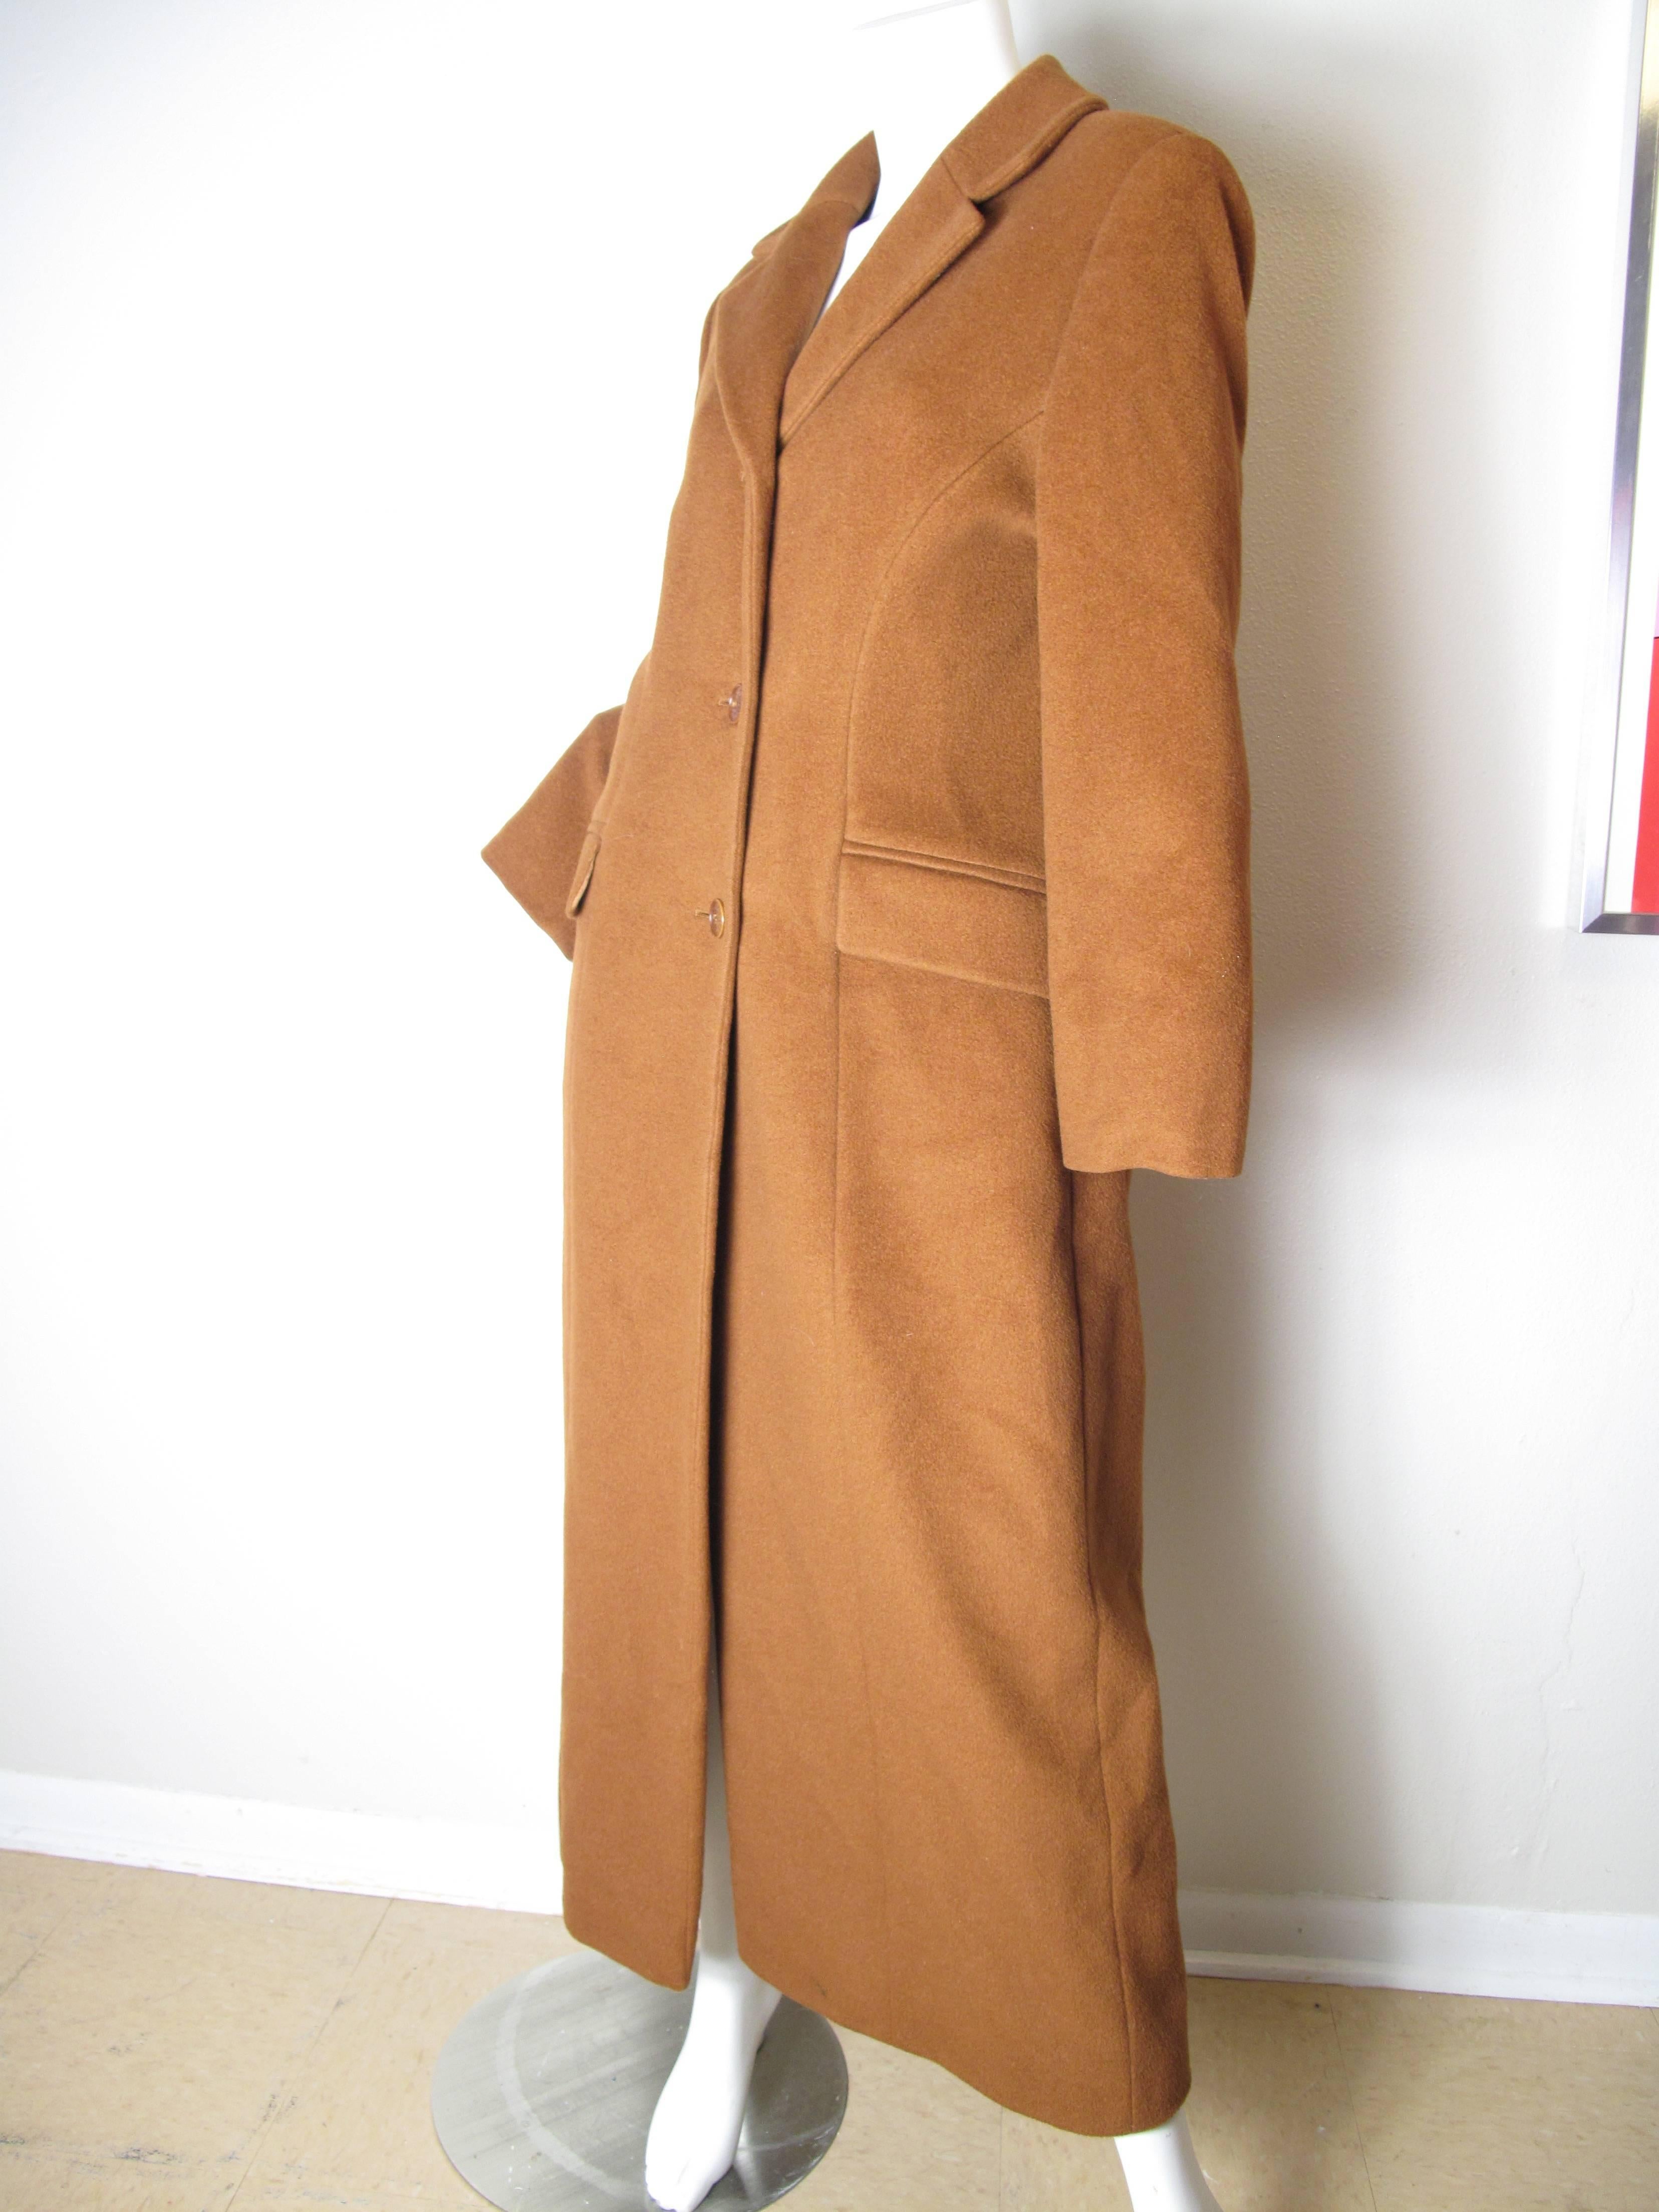 Gorgeous Guy Laroche Brown Wool Coat. Two front pockets, buttons down front. Condition: Excellent. Size 42/ US 8  ( mannequin is size 6 )

We accept returns for refund, please see our terms.  We offer free ground shipping within the US